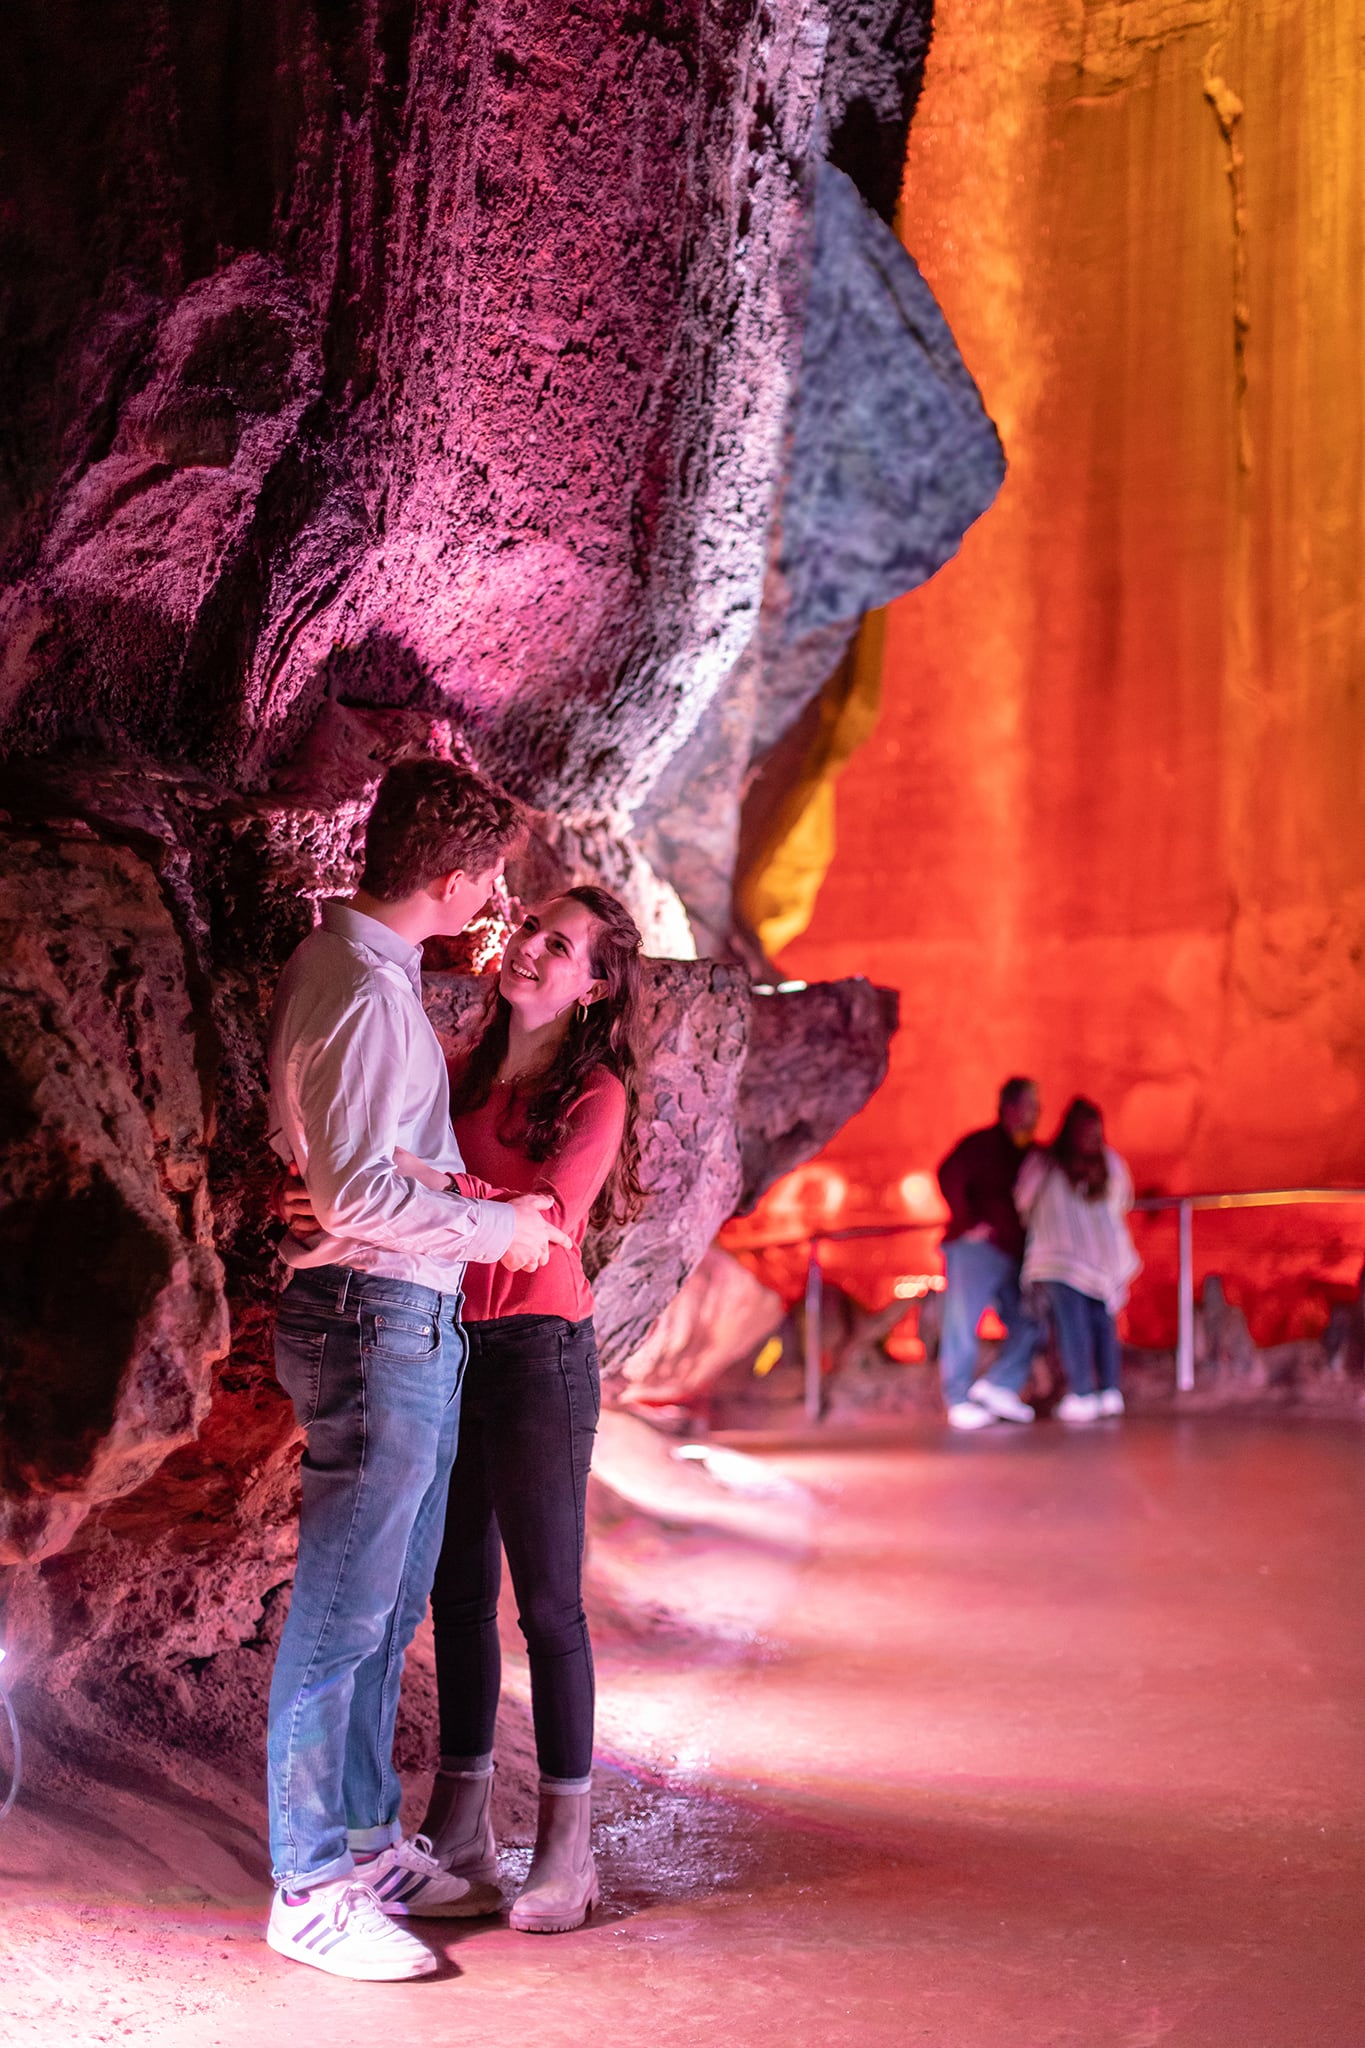 A young couple embraces in front of Ruby falls in the cave